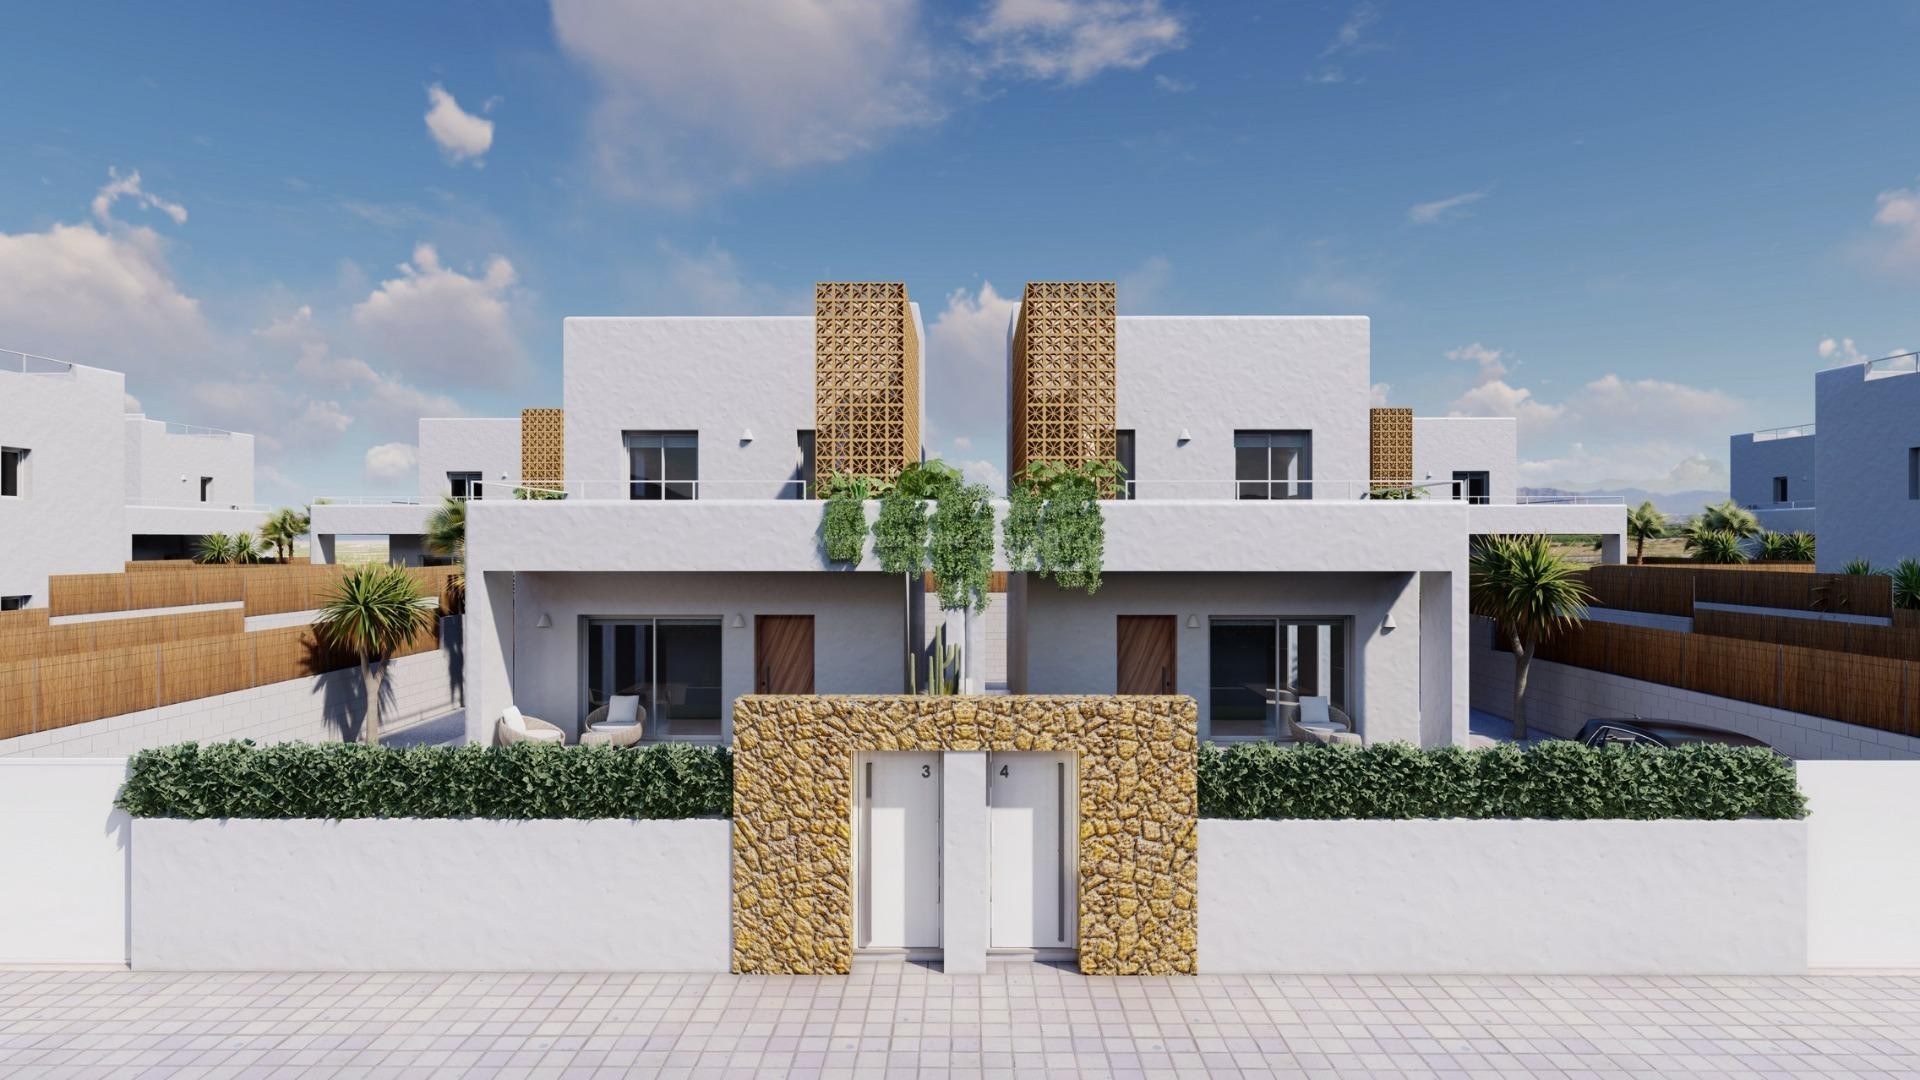 New villas/houses in Pilar de la Horadada, 3 bedrooms, 3 bathrooms, large landscaped garden with private swimming pool and parking space.